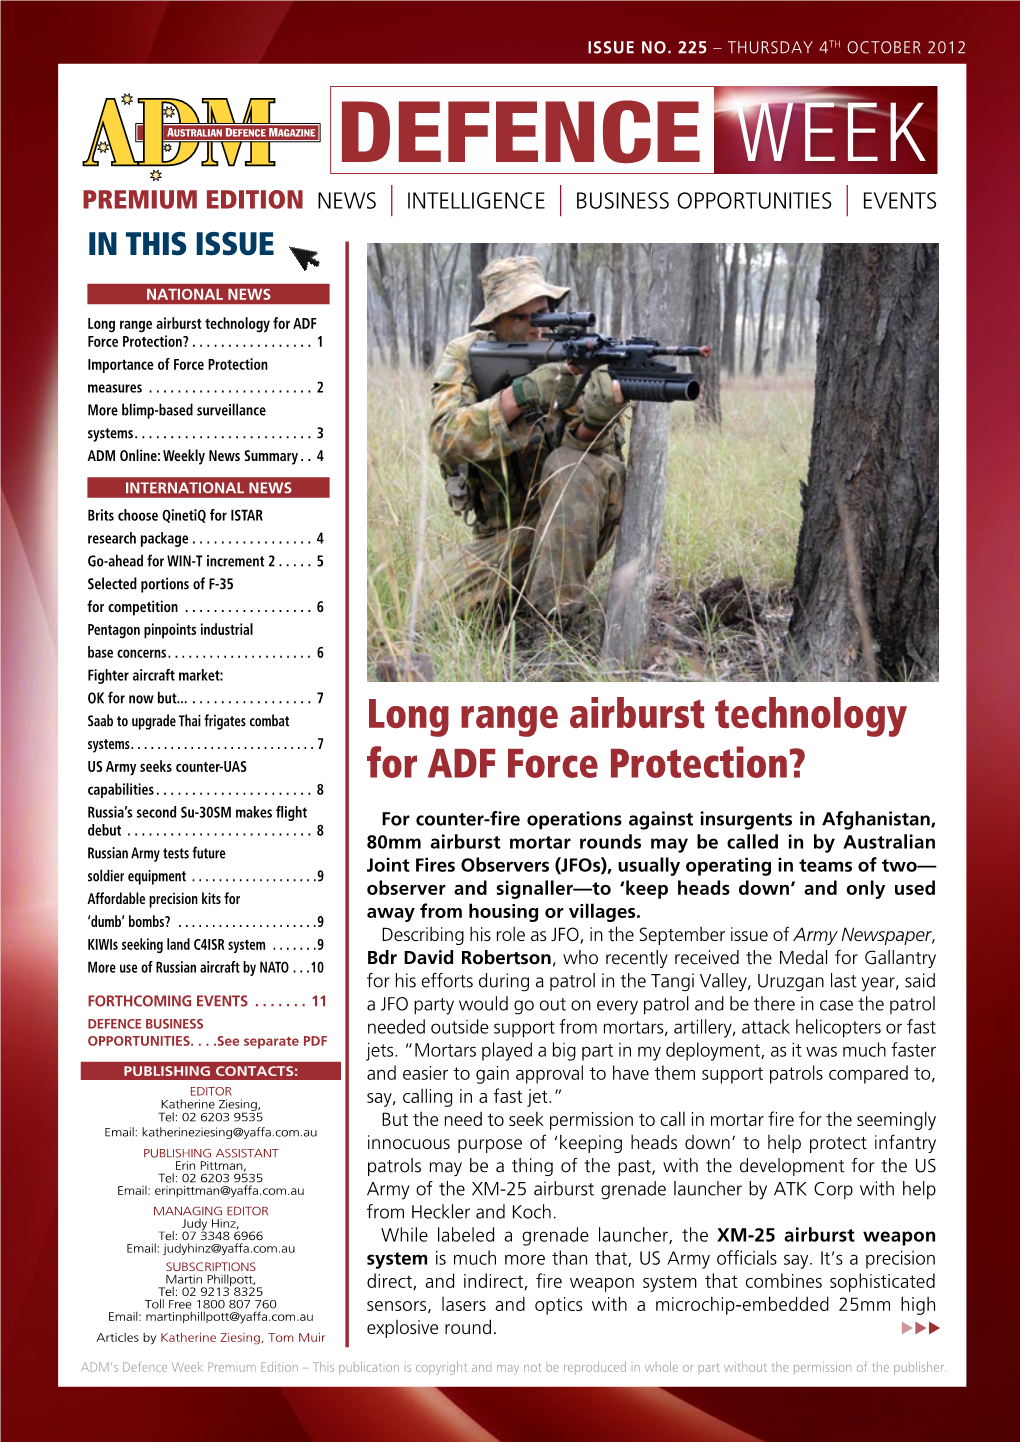 Long Range Airburst Technology for ADF Force Protection?